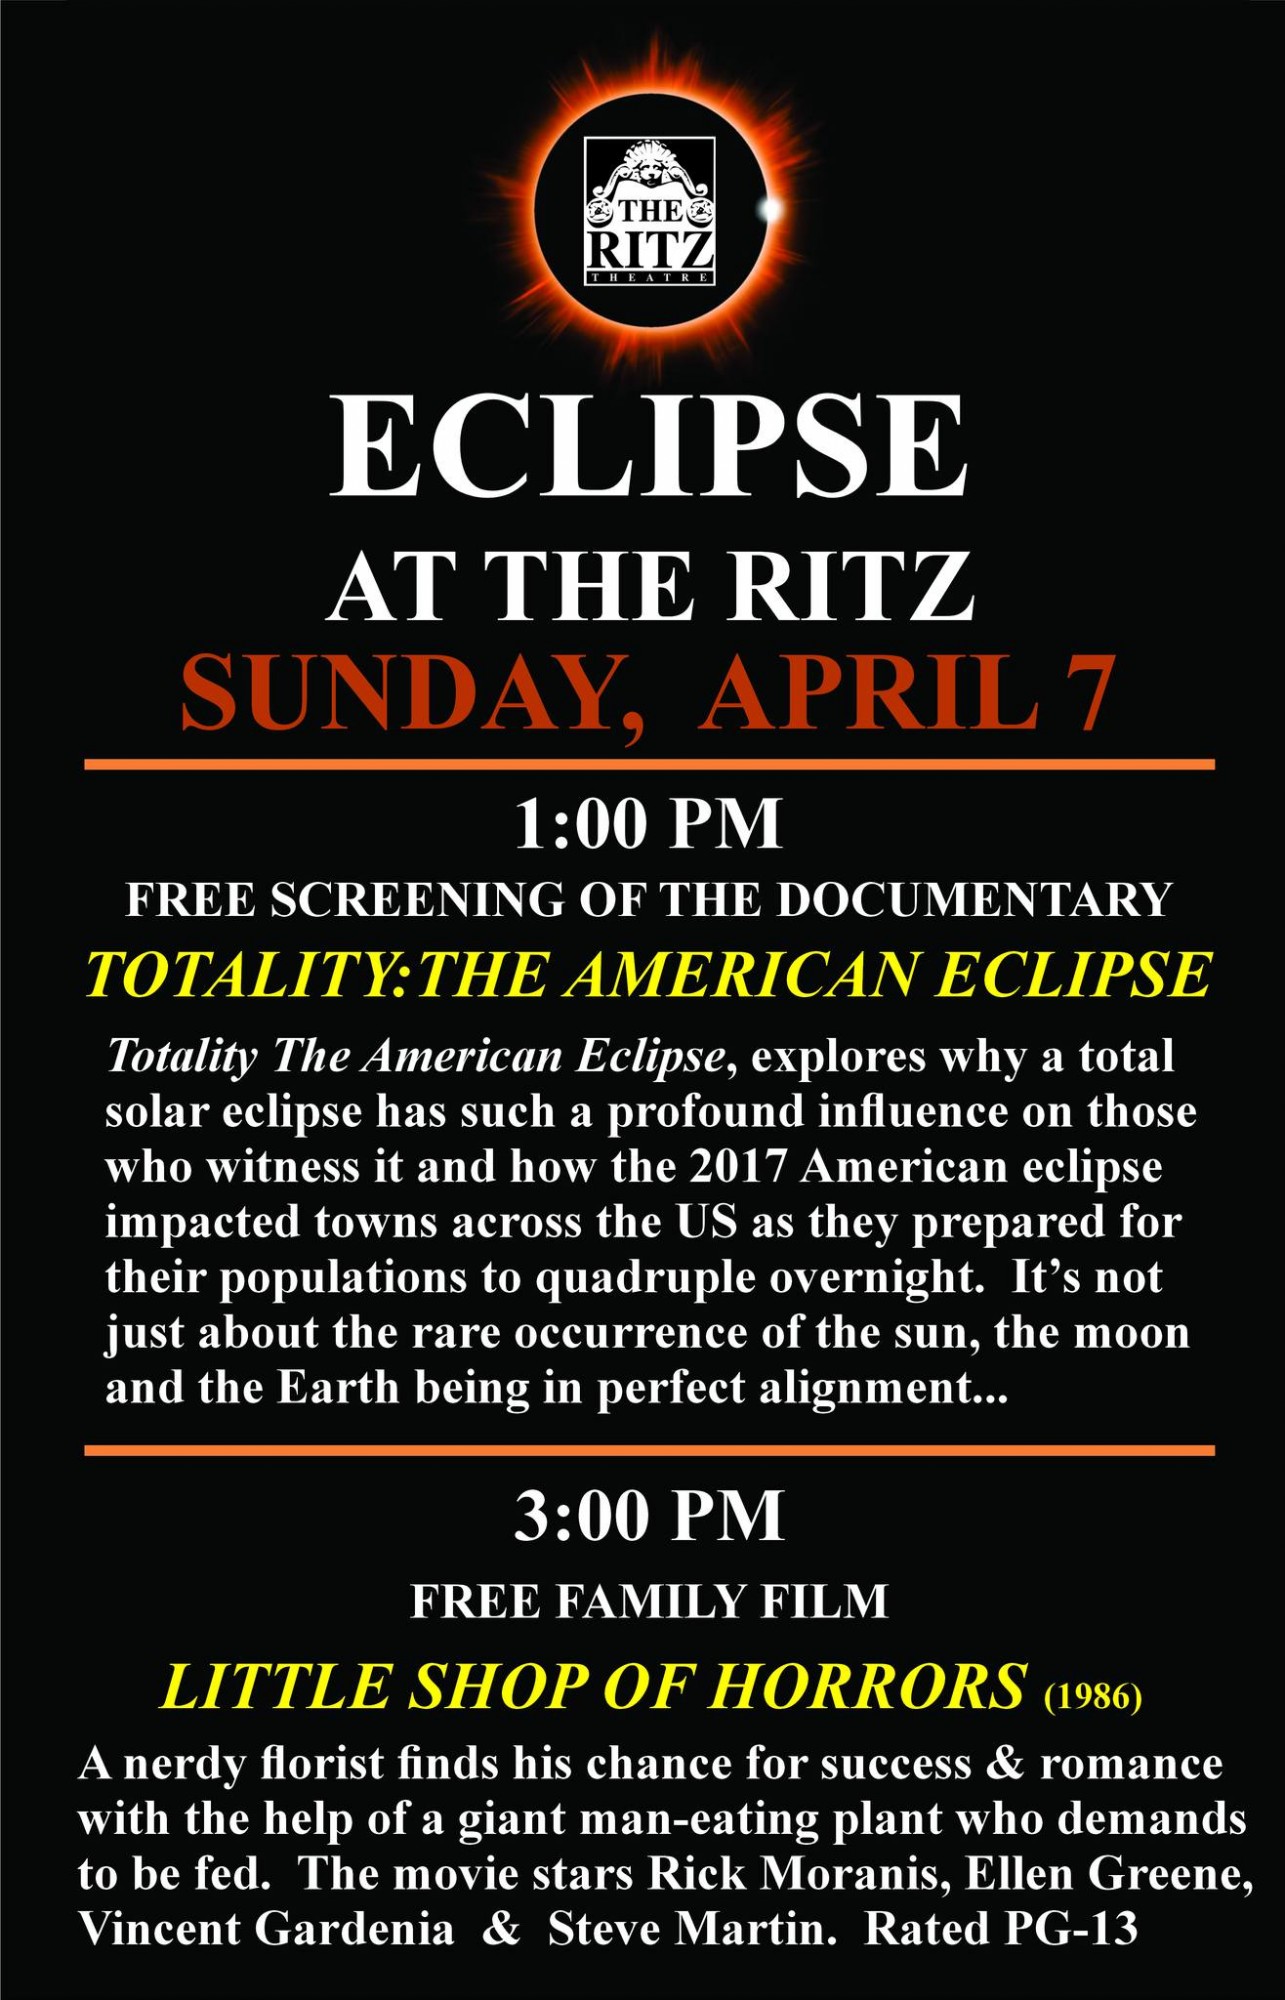 Eclipse at The Ritz